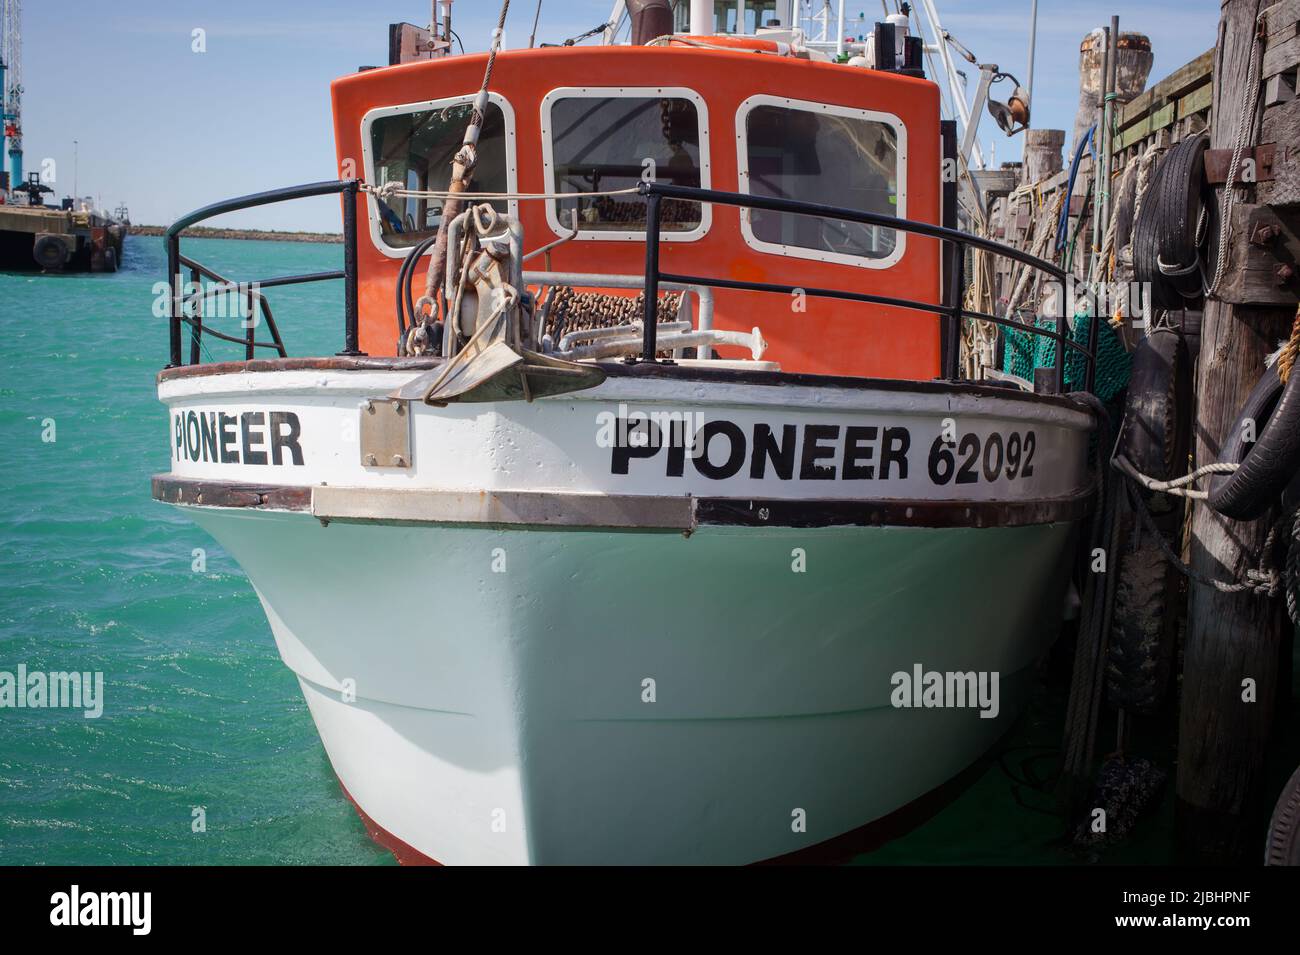 Inshore Commercial Fishing Vessels: small trawlers and Set-net vessels. Timaru Wharf, South Island New Zealand. Stock Photo